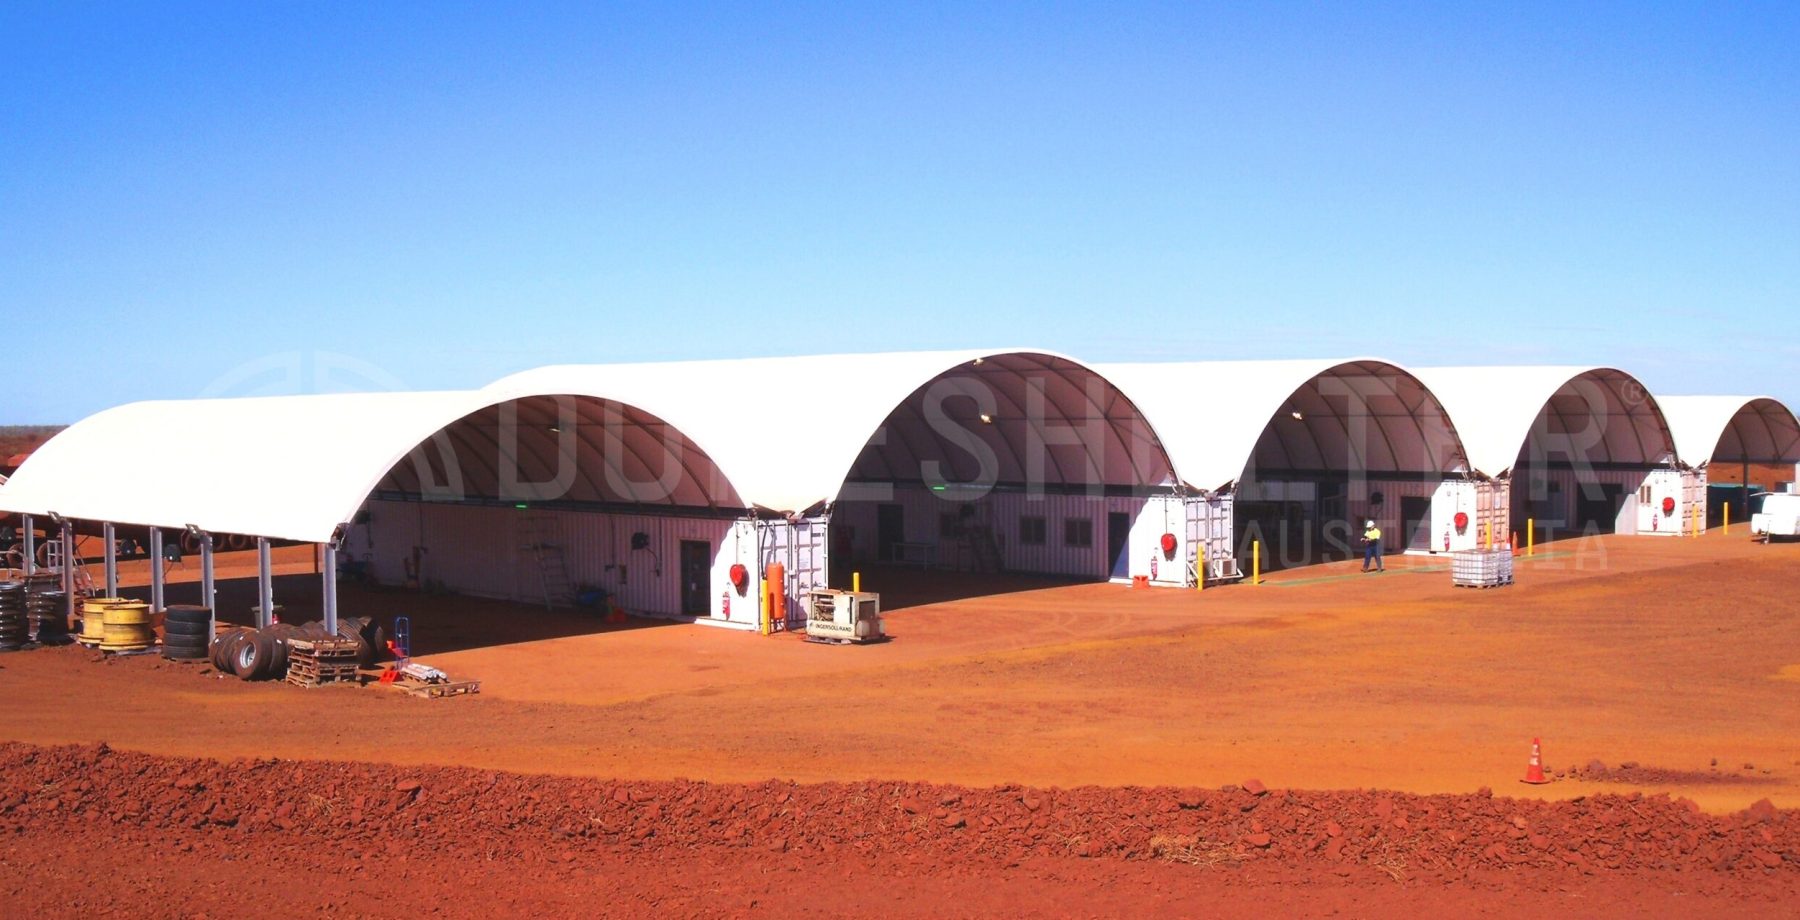 mine site container dome shelter